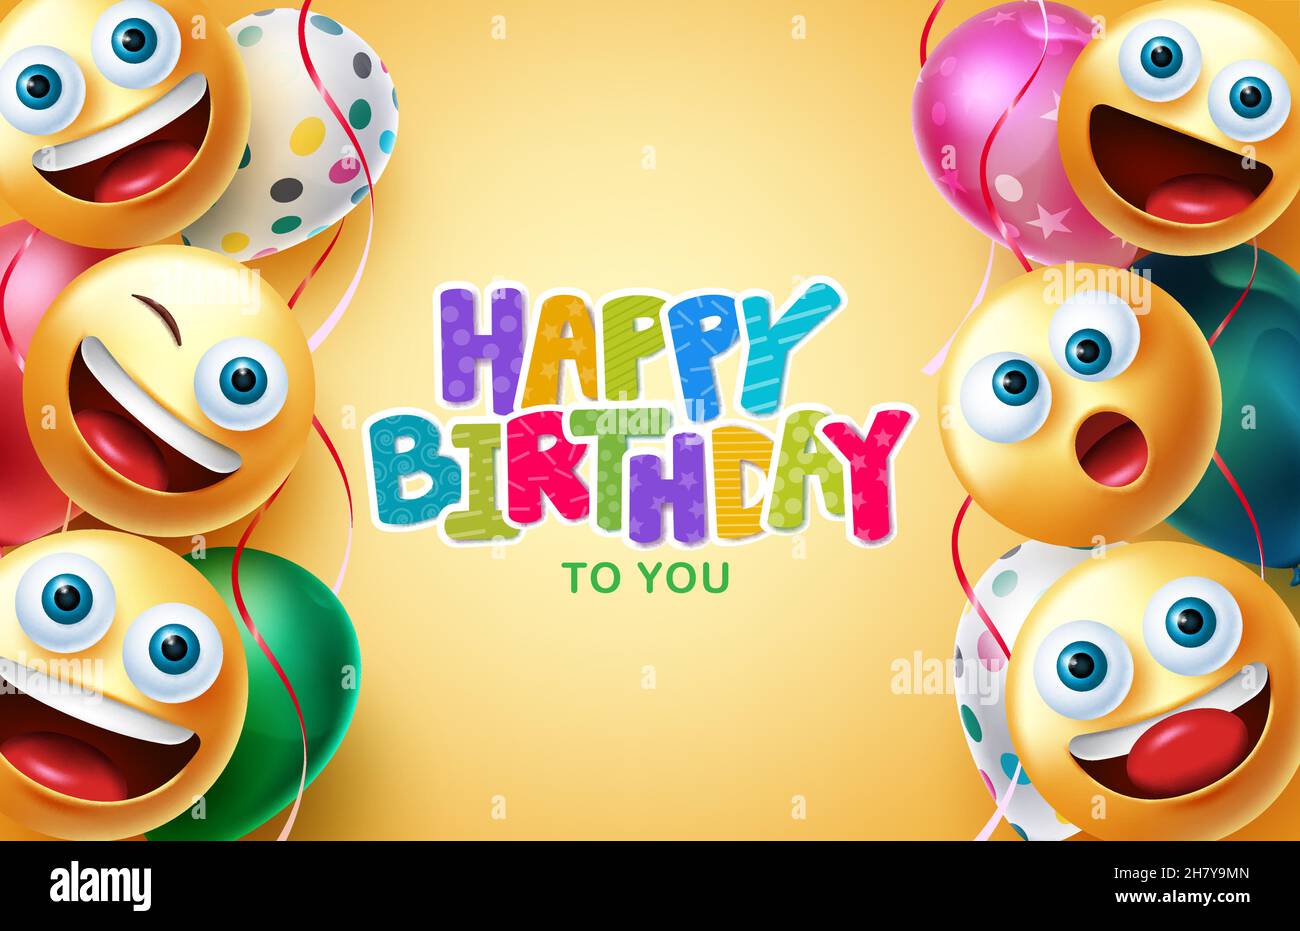 Birthday greeting vector background design. Happy birthday text with smileys and balloons floating decoration elements for birth day celebration. Stock Vector